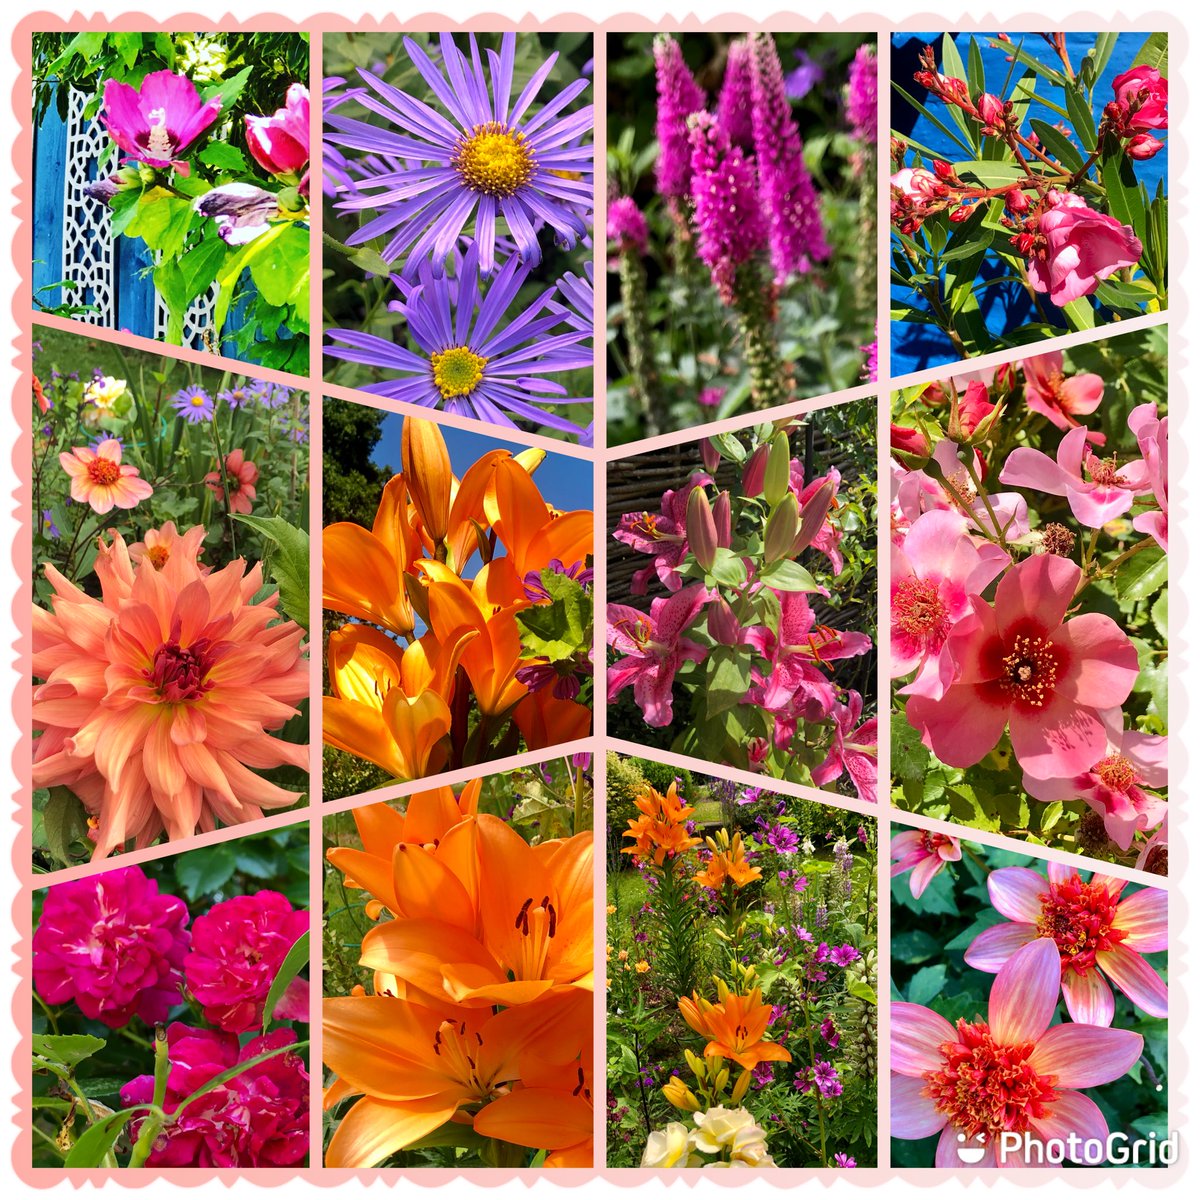 looking forward to my garden in 2023 and everybody’s lovely gardening posts. Wishing you all a colourful, floriferous Year ahead. #NewYear2023 #GardeningTwitter #mygarden #Flowers #gardening #SeedsForTheFuture #bulbs #nearlyspring #HappyNewYear